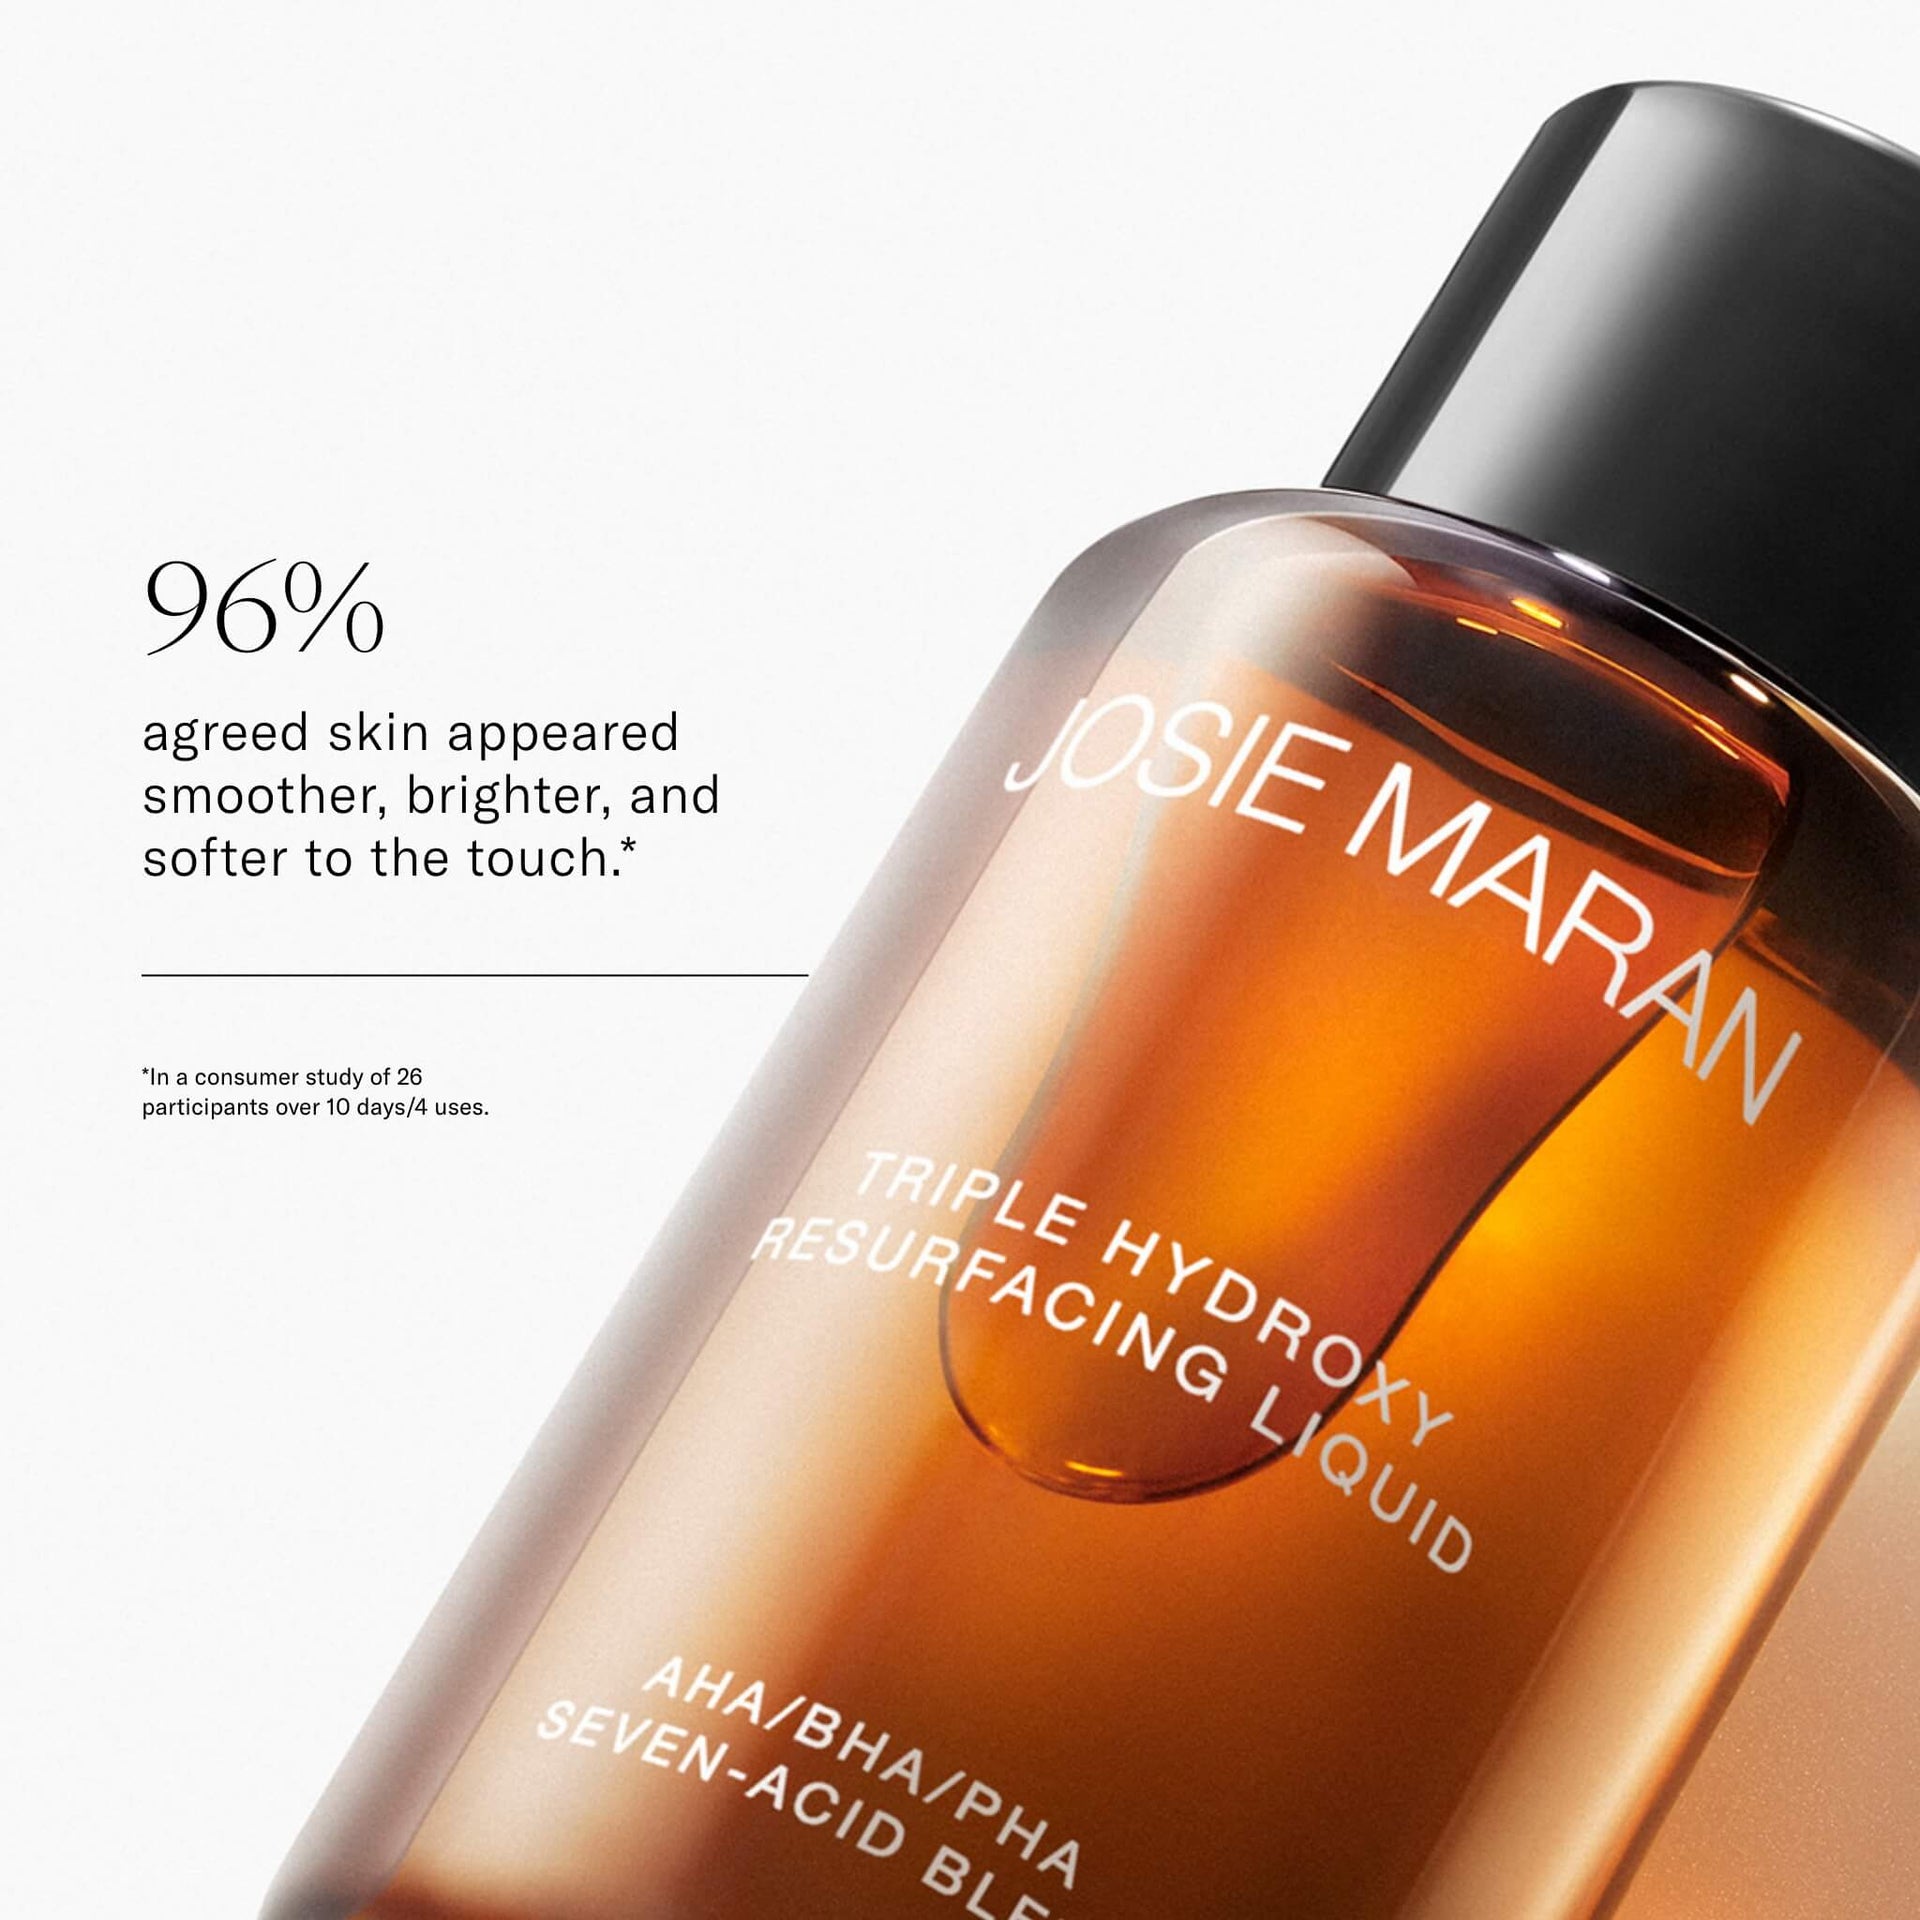 96% agreed skin appeared smoother, brighter and softer to the touch.*